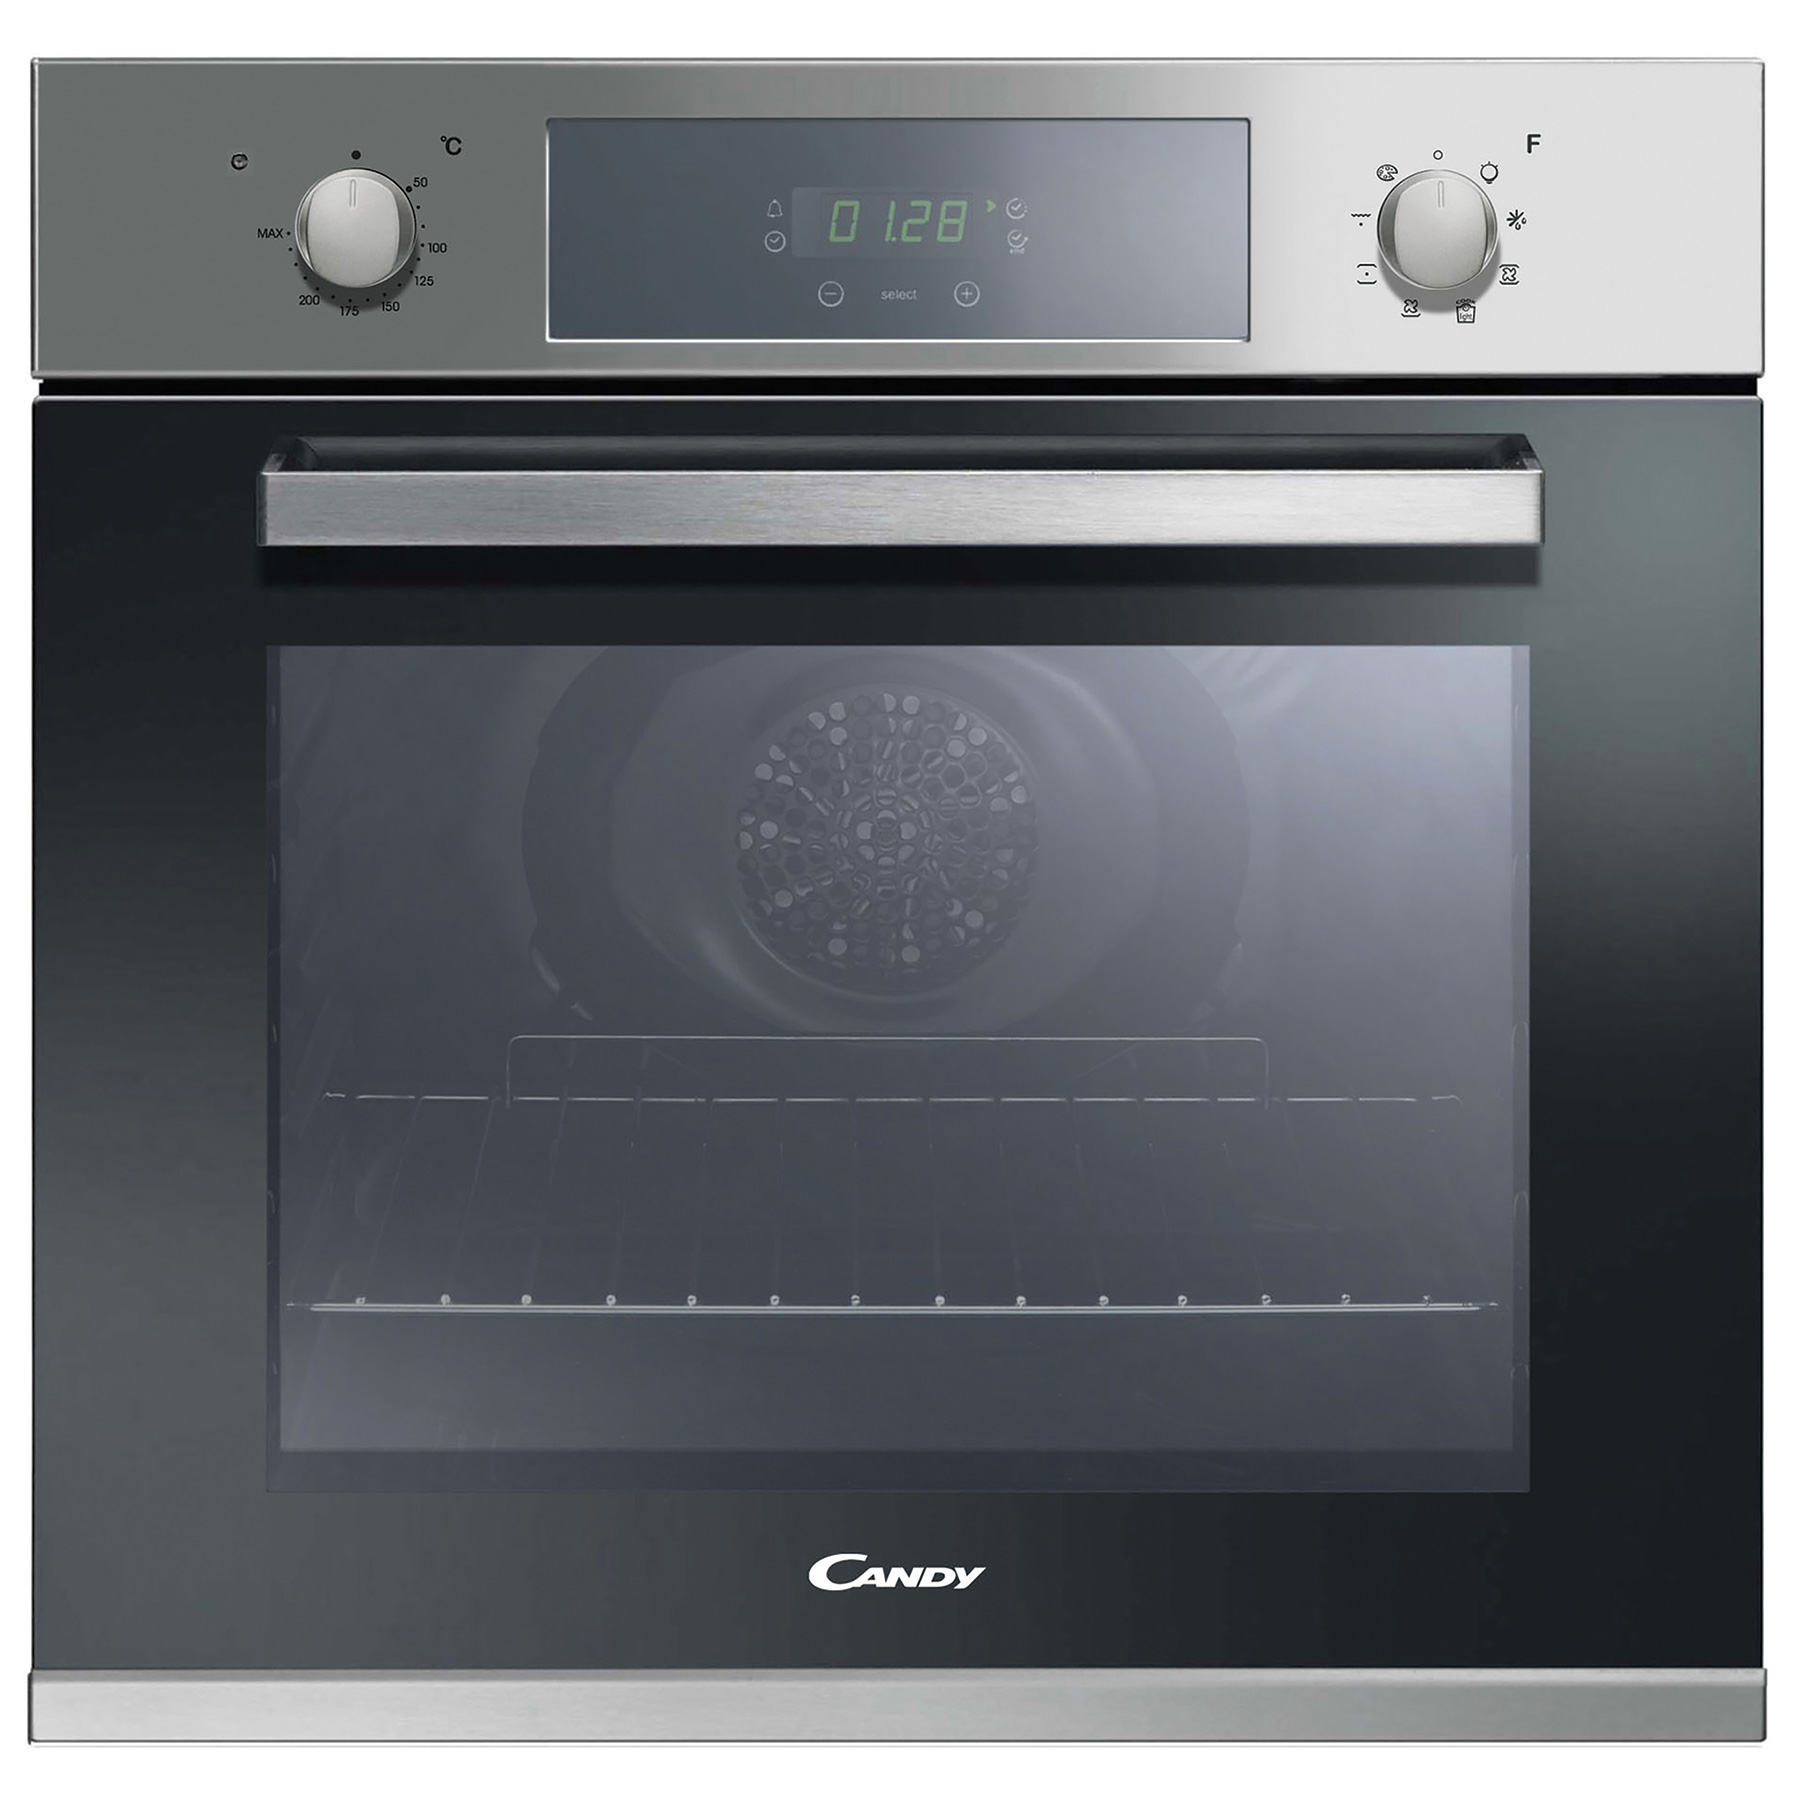 Image of Candy FCP605XE Built In Electric Single Oven in St Steel 65L A Rated